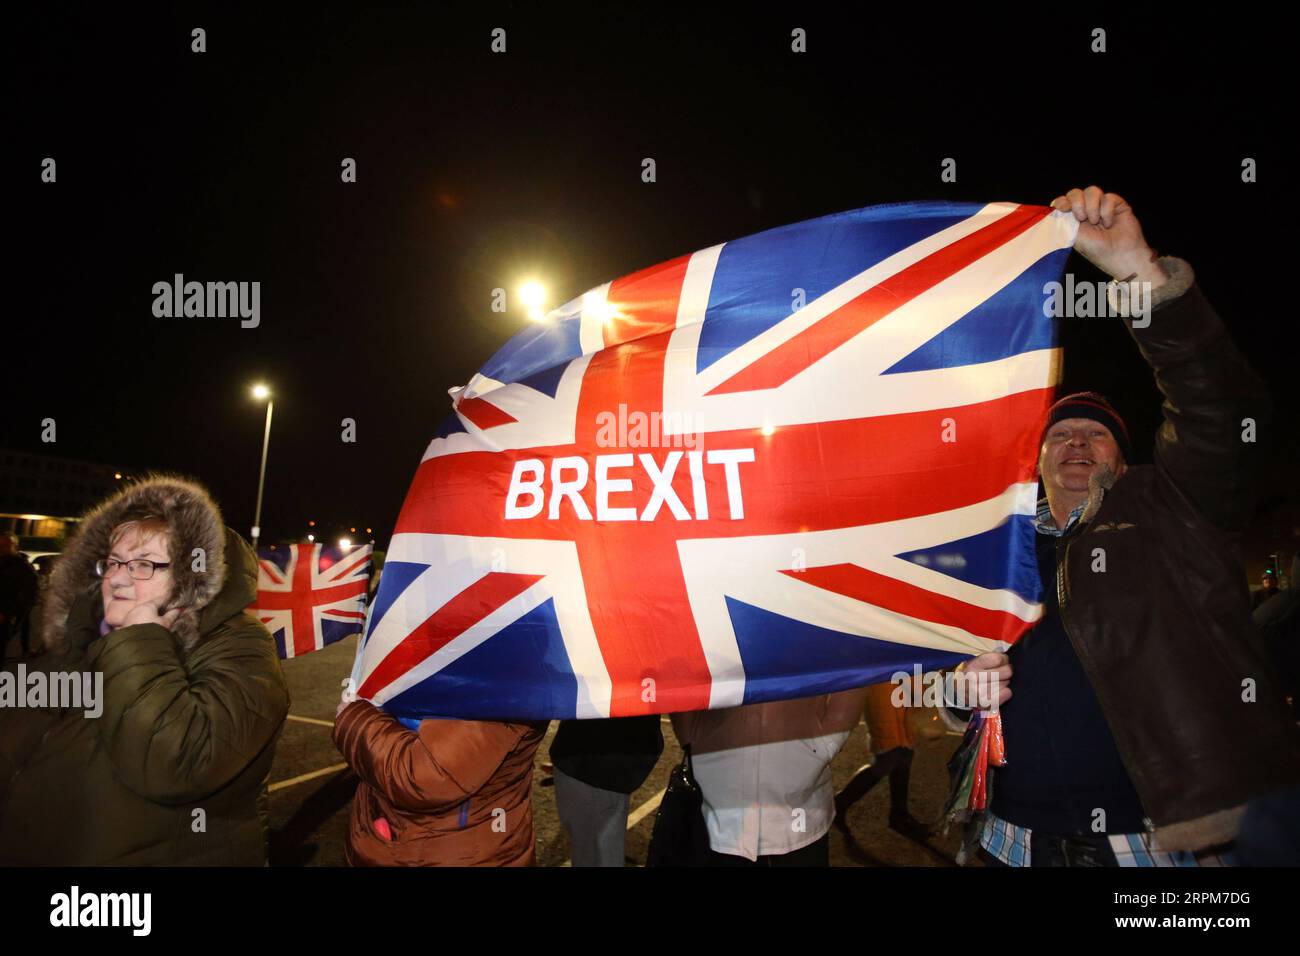 200201 -- BELFAST, Feb. 1, 2020 -- Pro-Brexit supporters celebrate Brexit outside Stormont in east Belfast, Northern Ireland, Britain on Jan. 31, 2020. Britain officially left the European Union EU at 11 p.m. 2300 GMT Friday, putting an end to its 47-year-long membership of the world s largest trading bloc. Photo by Paul McErlane/Xinhua BRITAIN-BELFAST-BREXIT HanxYanPaulMcErlane PUBLICATIONxNOTxINxCHN Stock Photo